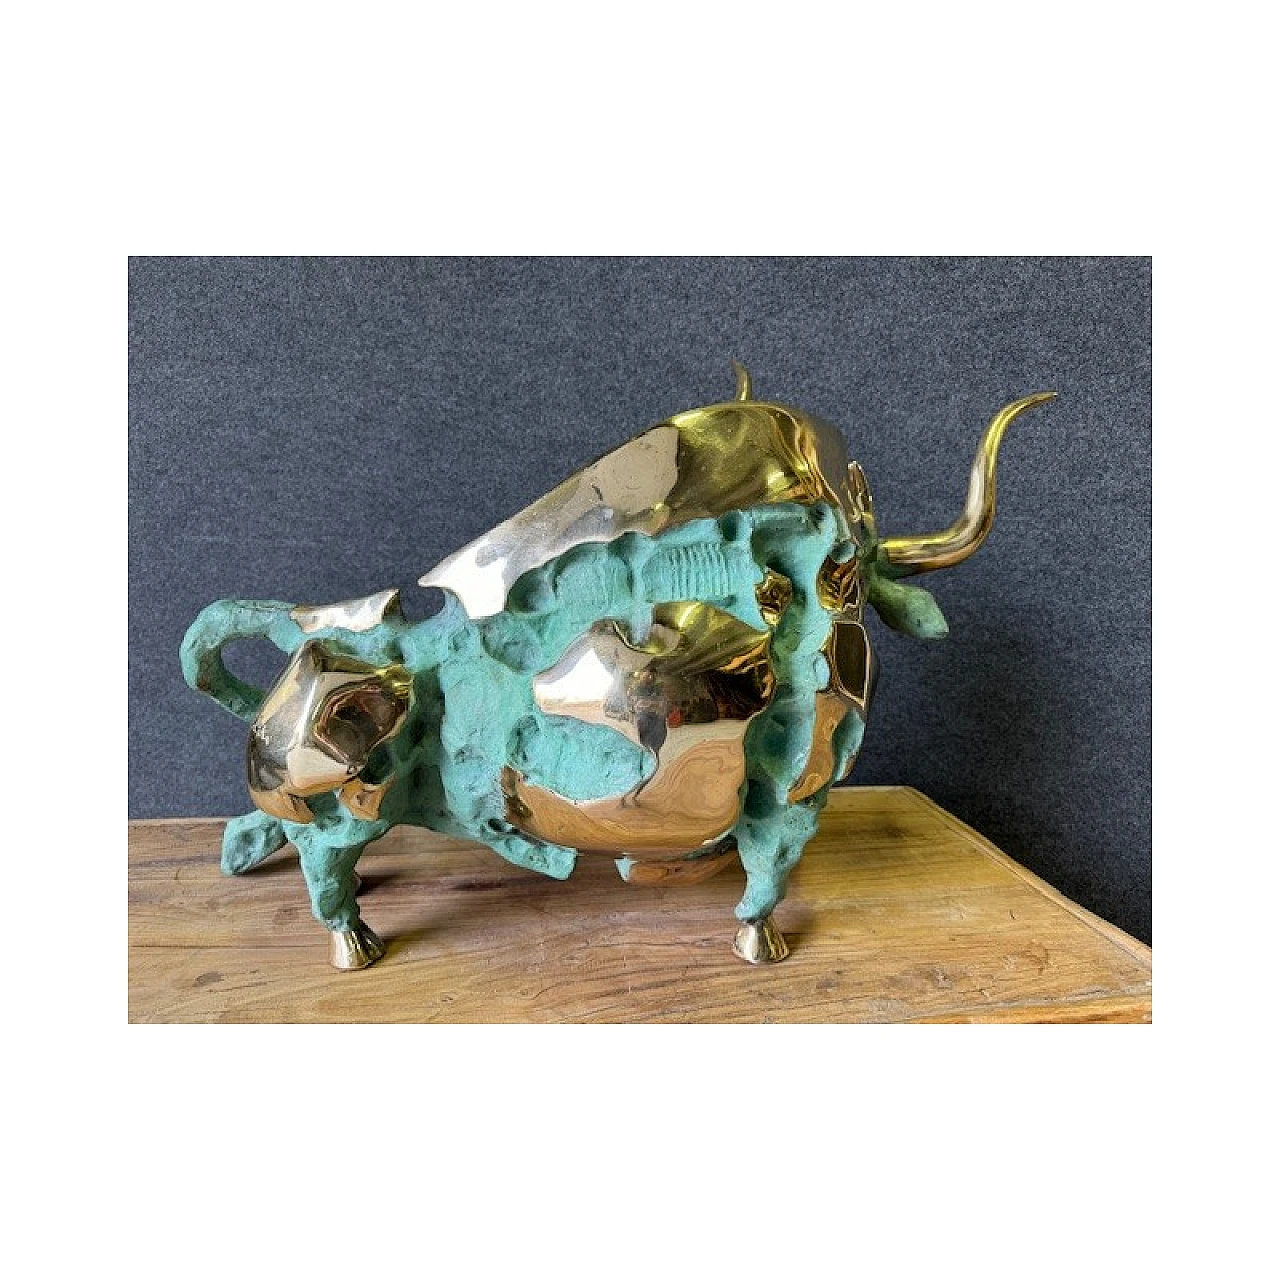 Oxidized and polished bronze bull sculpture 6